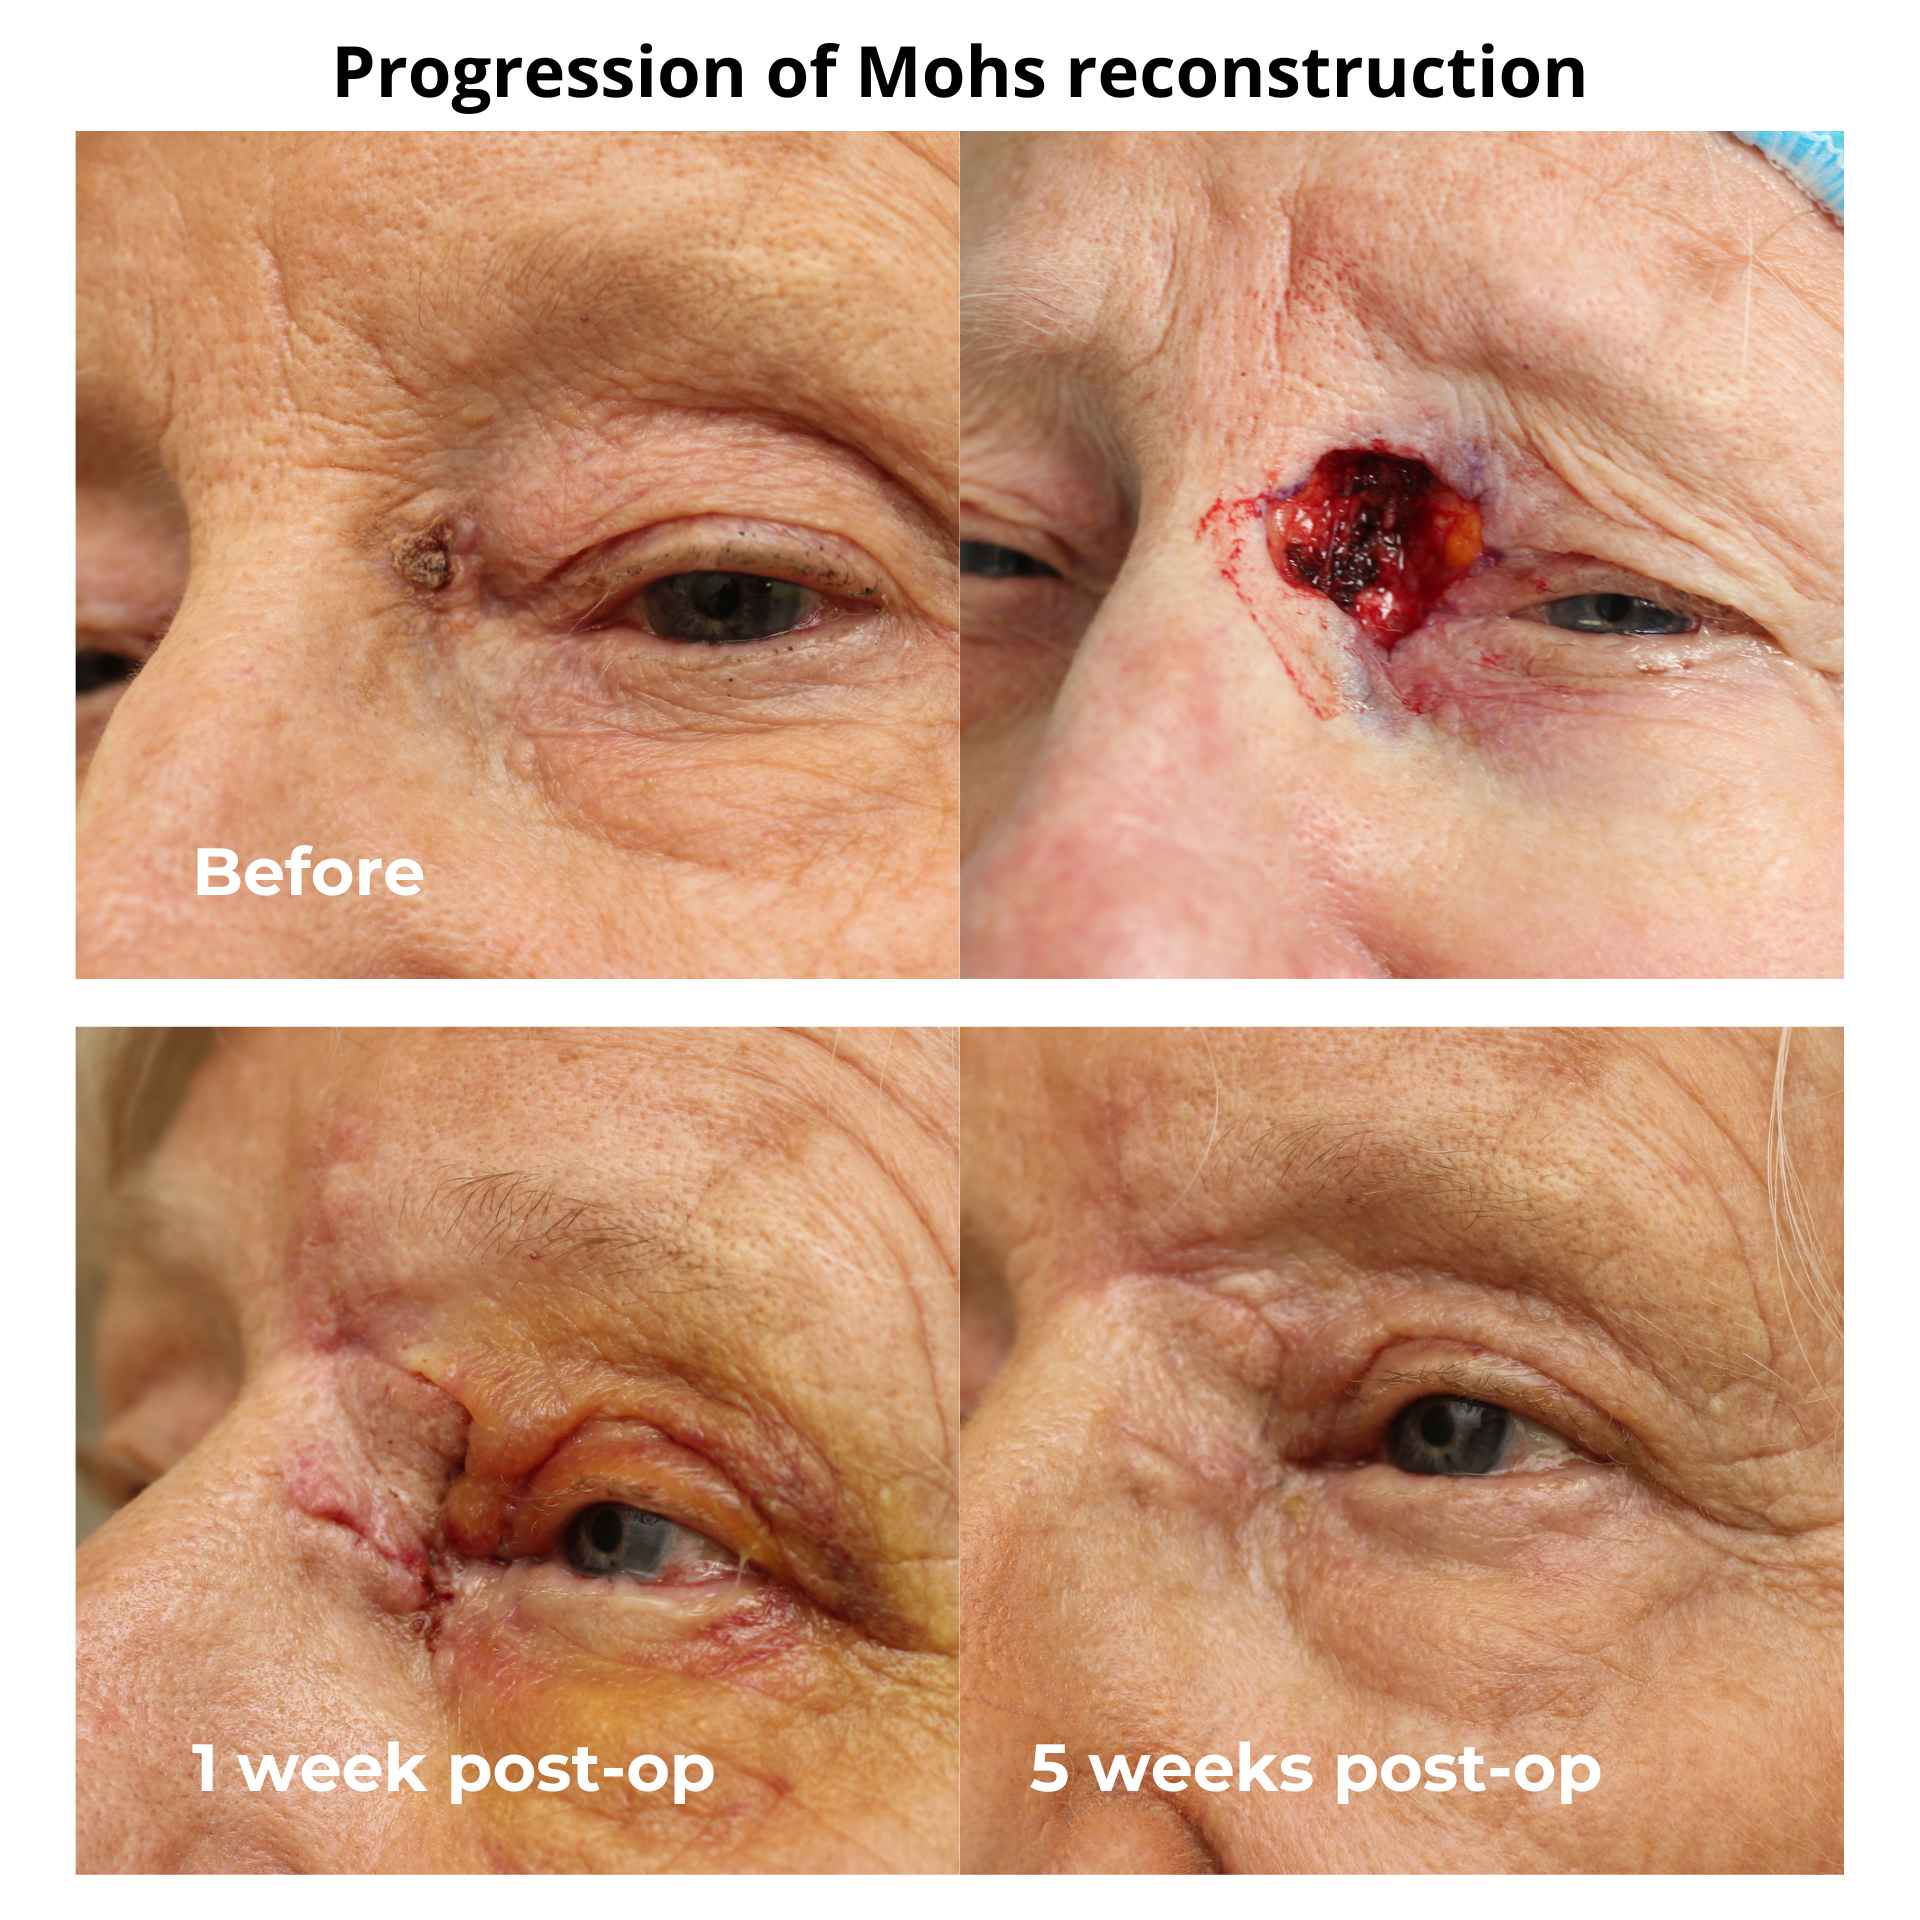 Mohs reconstruction surgery performed by Dr Anthony Maloof.